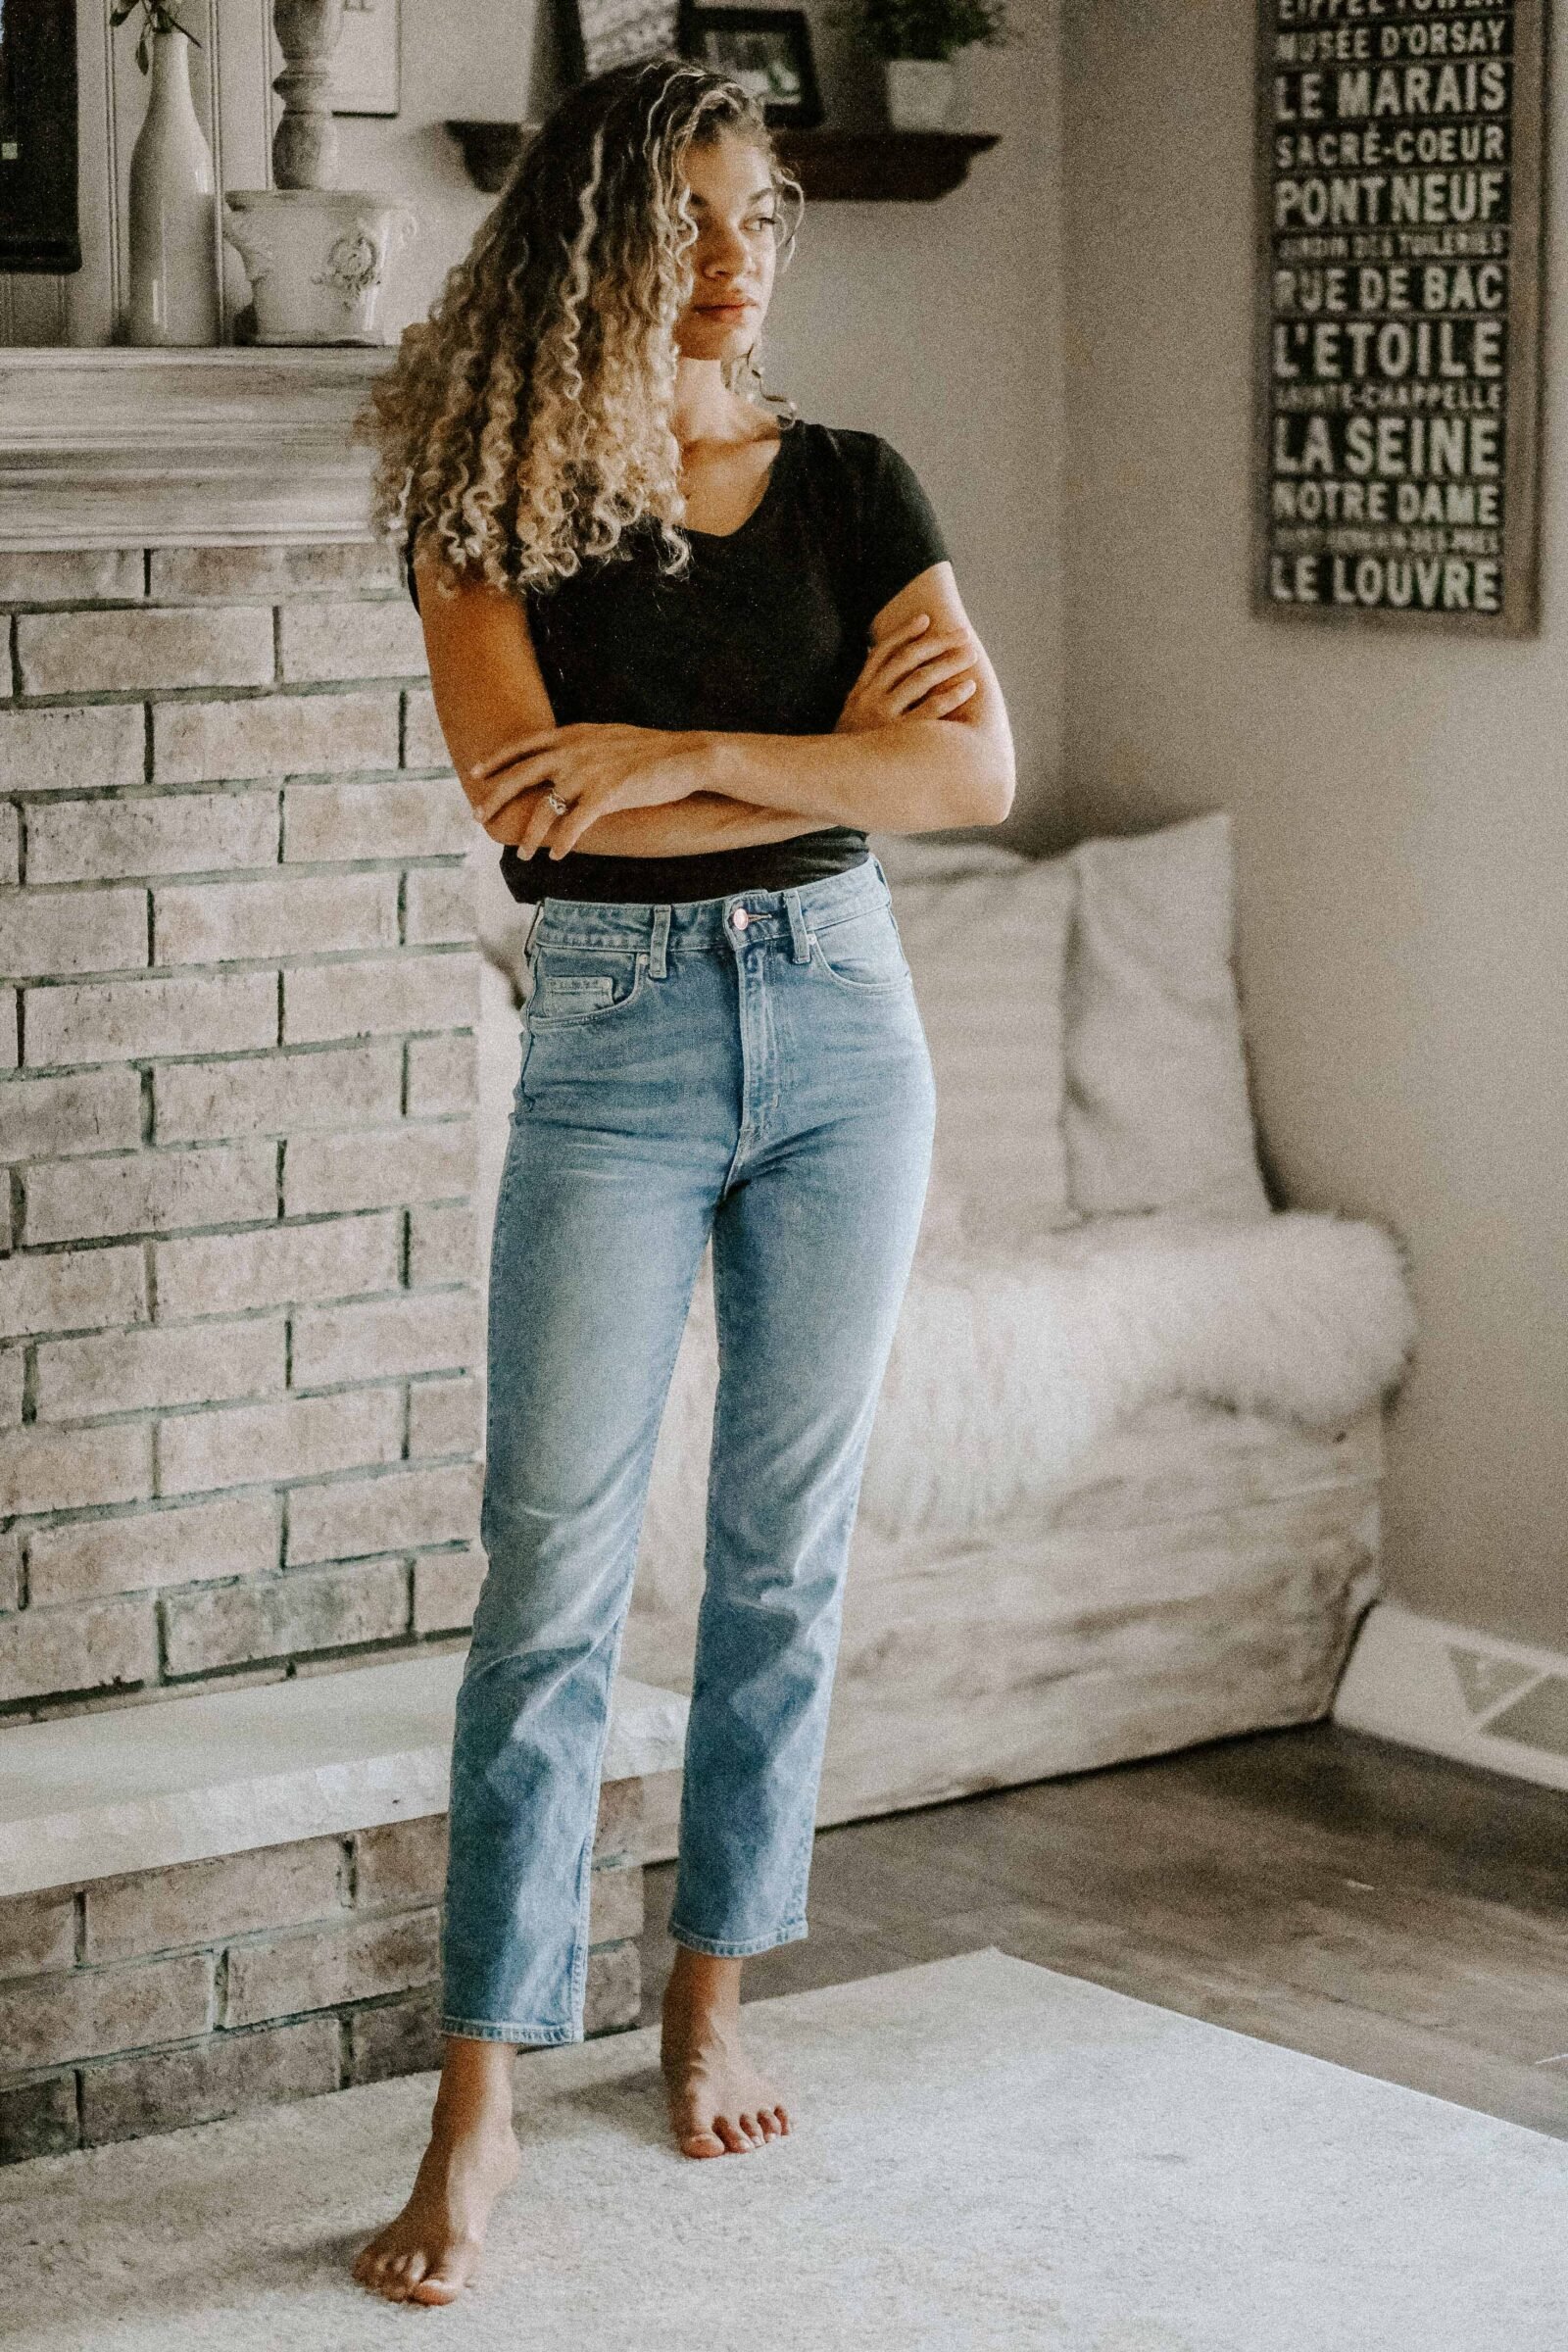 tee and jeans outfits